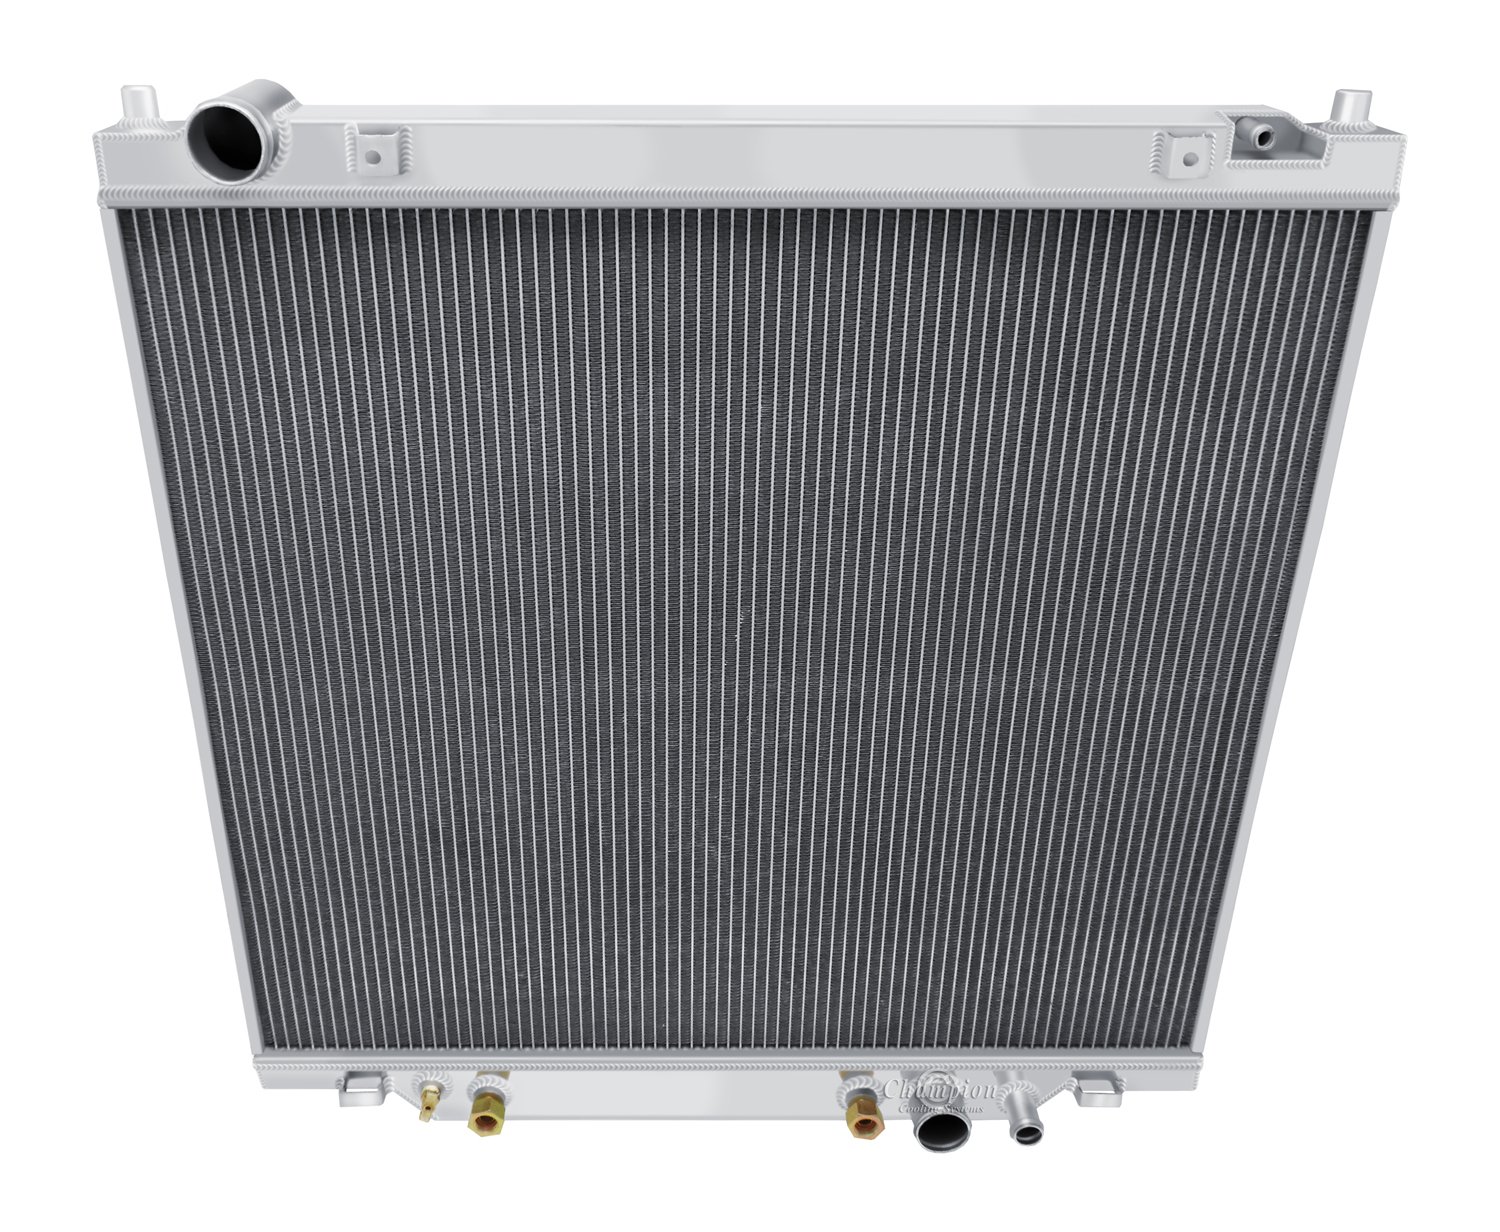 All-Aluminum Replacement Radiator for 1999-2004 Ford Truck/SUV 6.8L V10 or 7.3L Diesel Engine